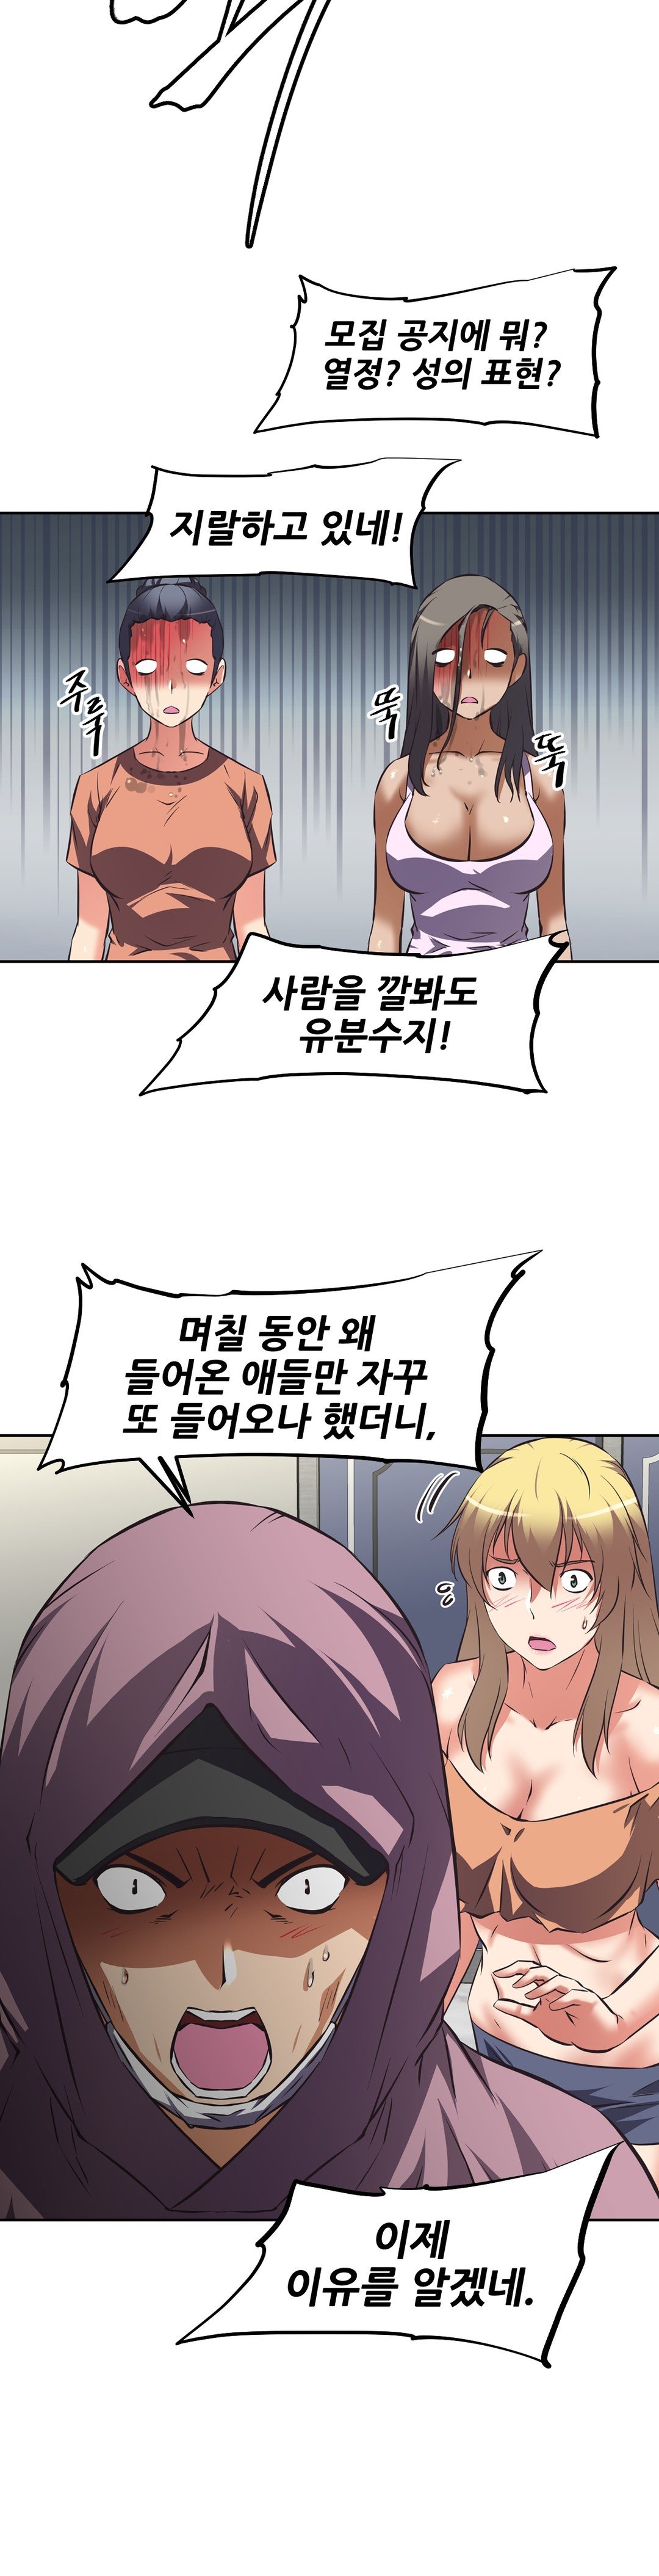 The Girls’ Nest Raw - Chapter 41 Page 5